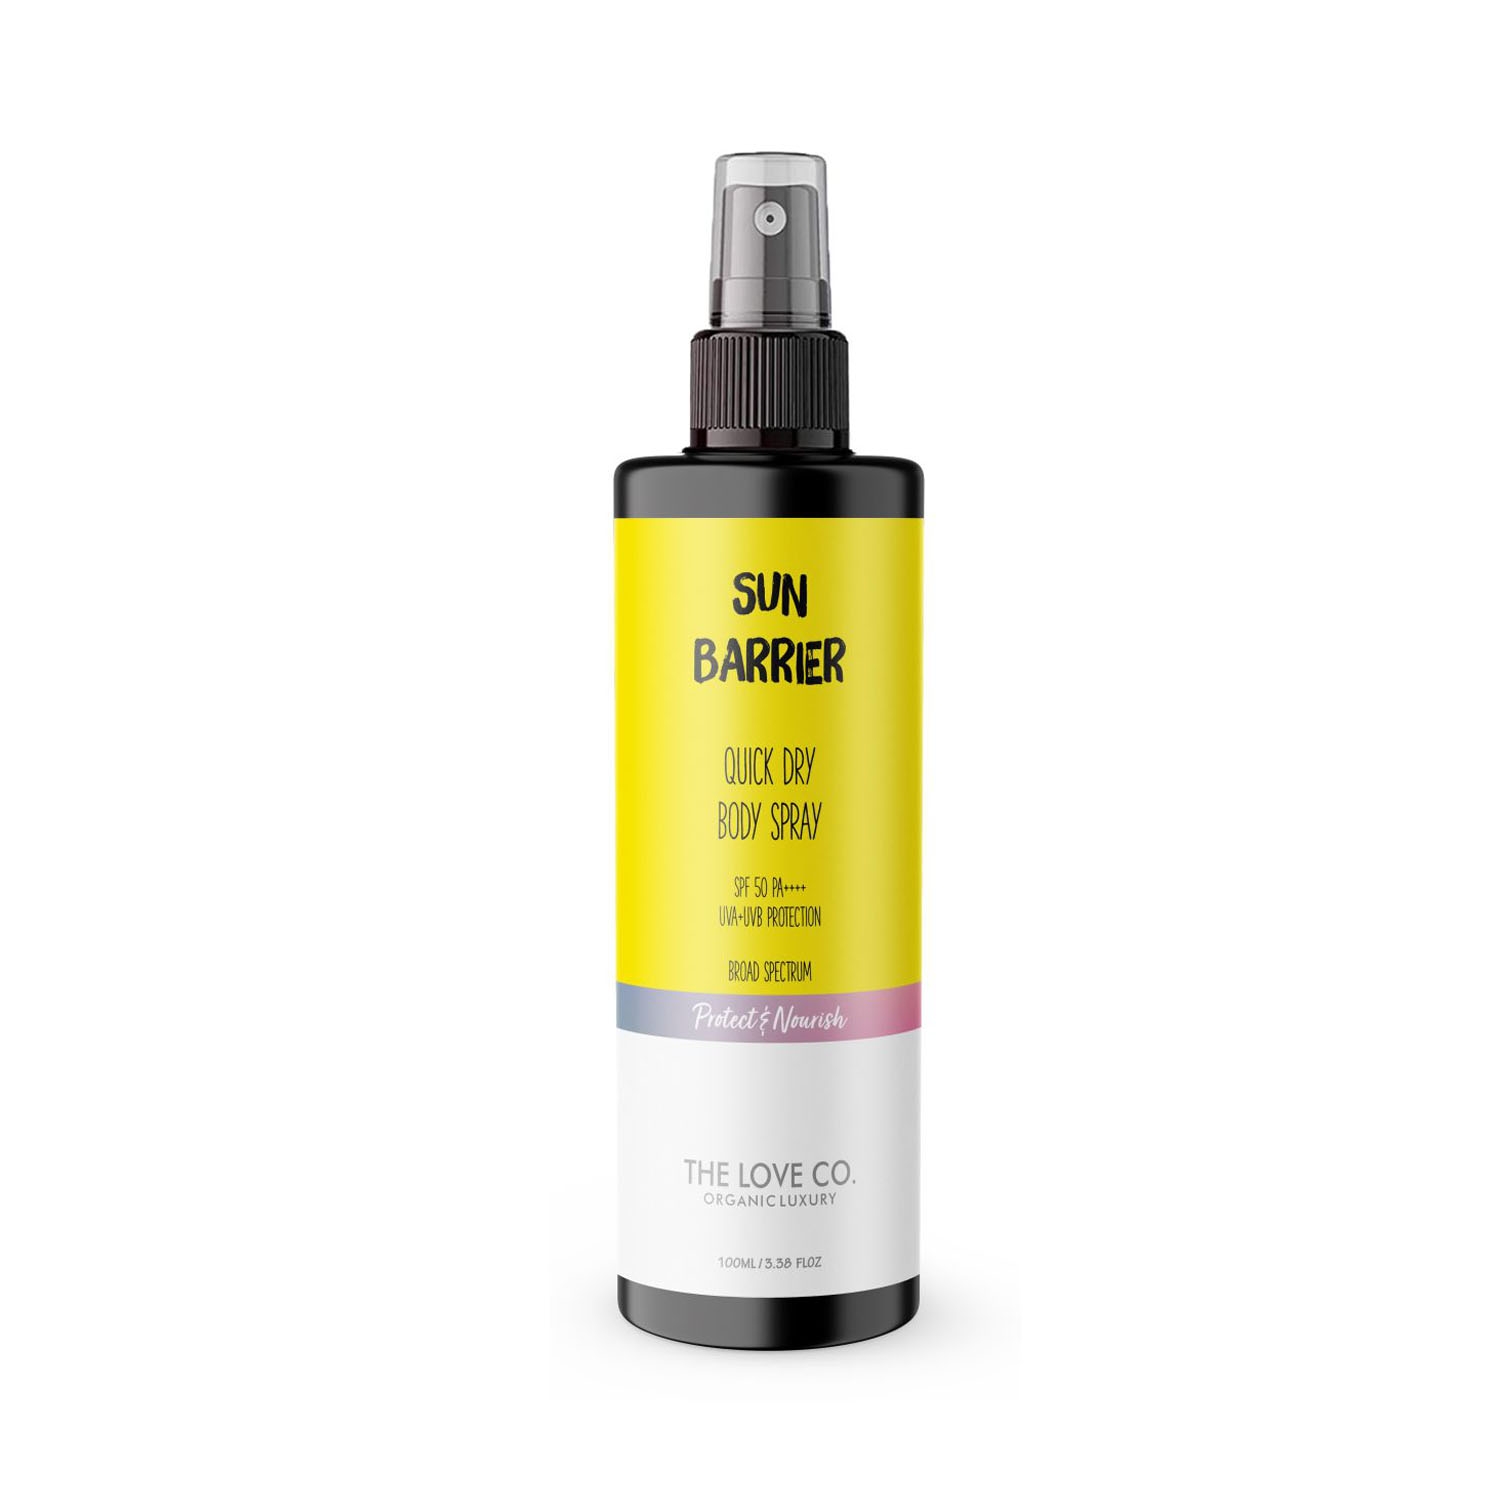 THE LOVE CO. | THE LOVE CO. Sun Barrier Quick Dry Body Spray With SPF 50 PA++++ UVA/UVB Protection (100ml)